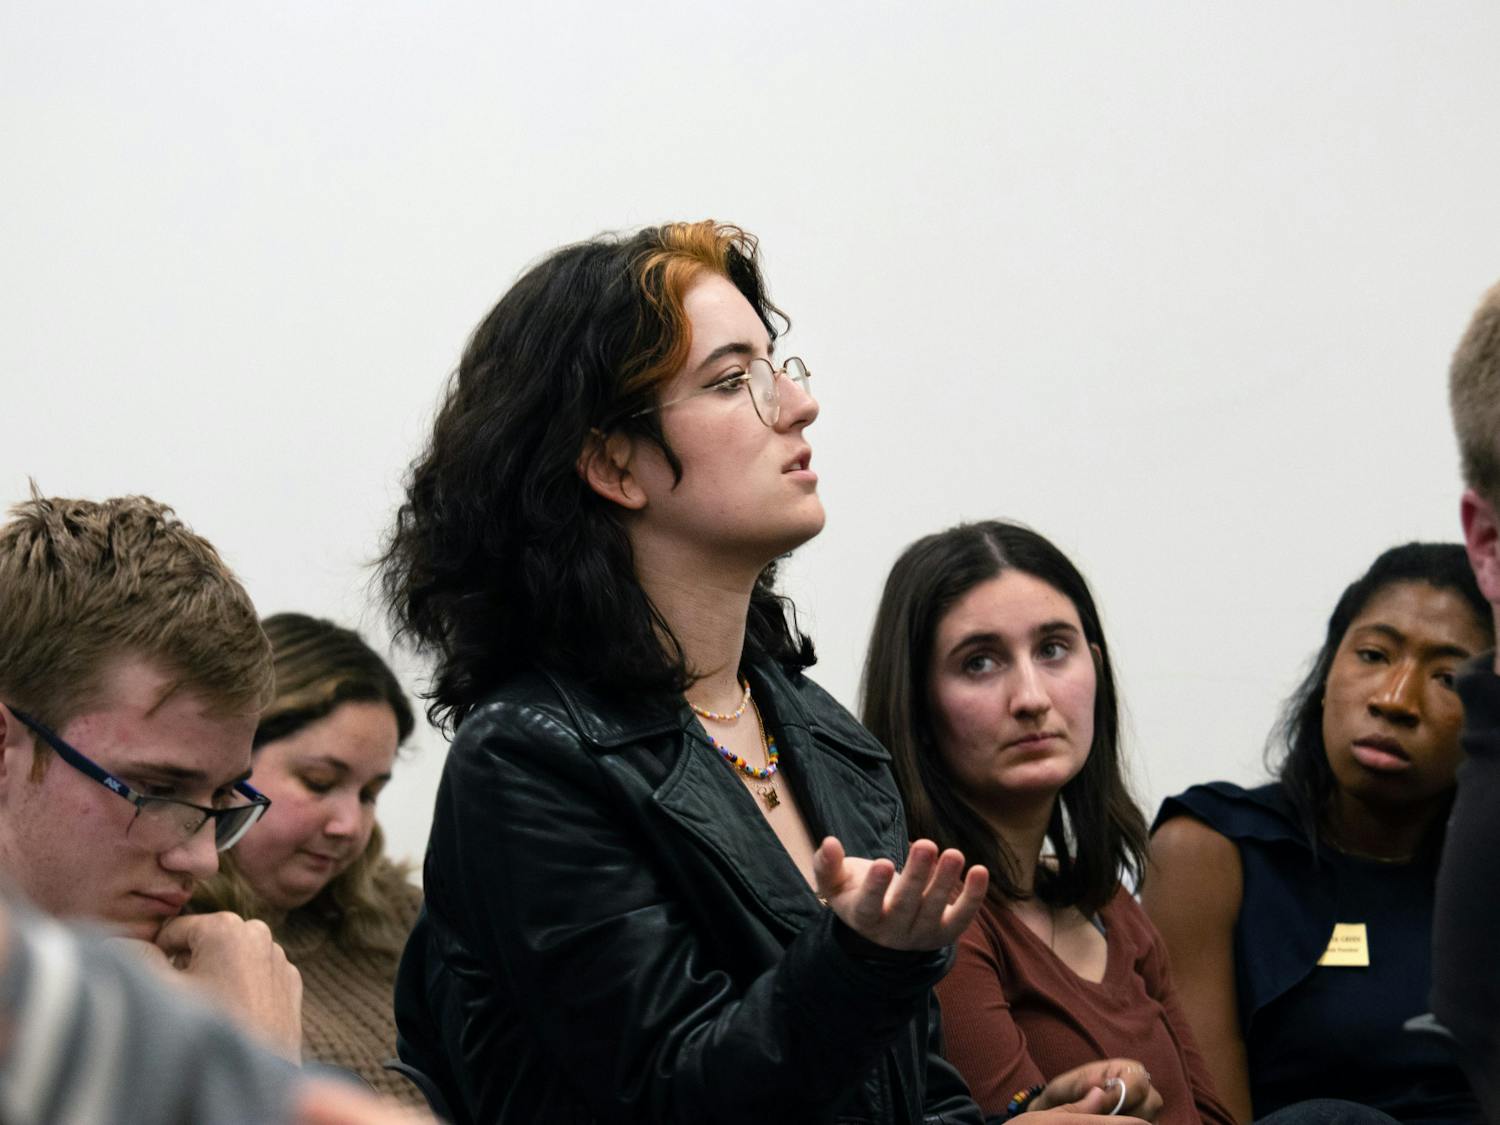 Fine Arts Senator of the Change Caucus Cassie Urbenz asks a question during the UF Student Senate Q&amp;A session about student organizational funding Wednesday, Jan. 11, 2023.